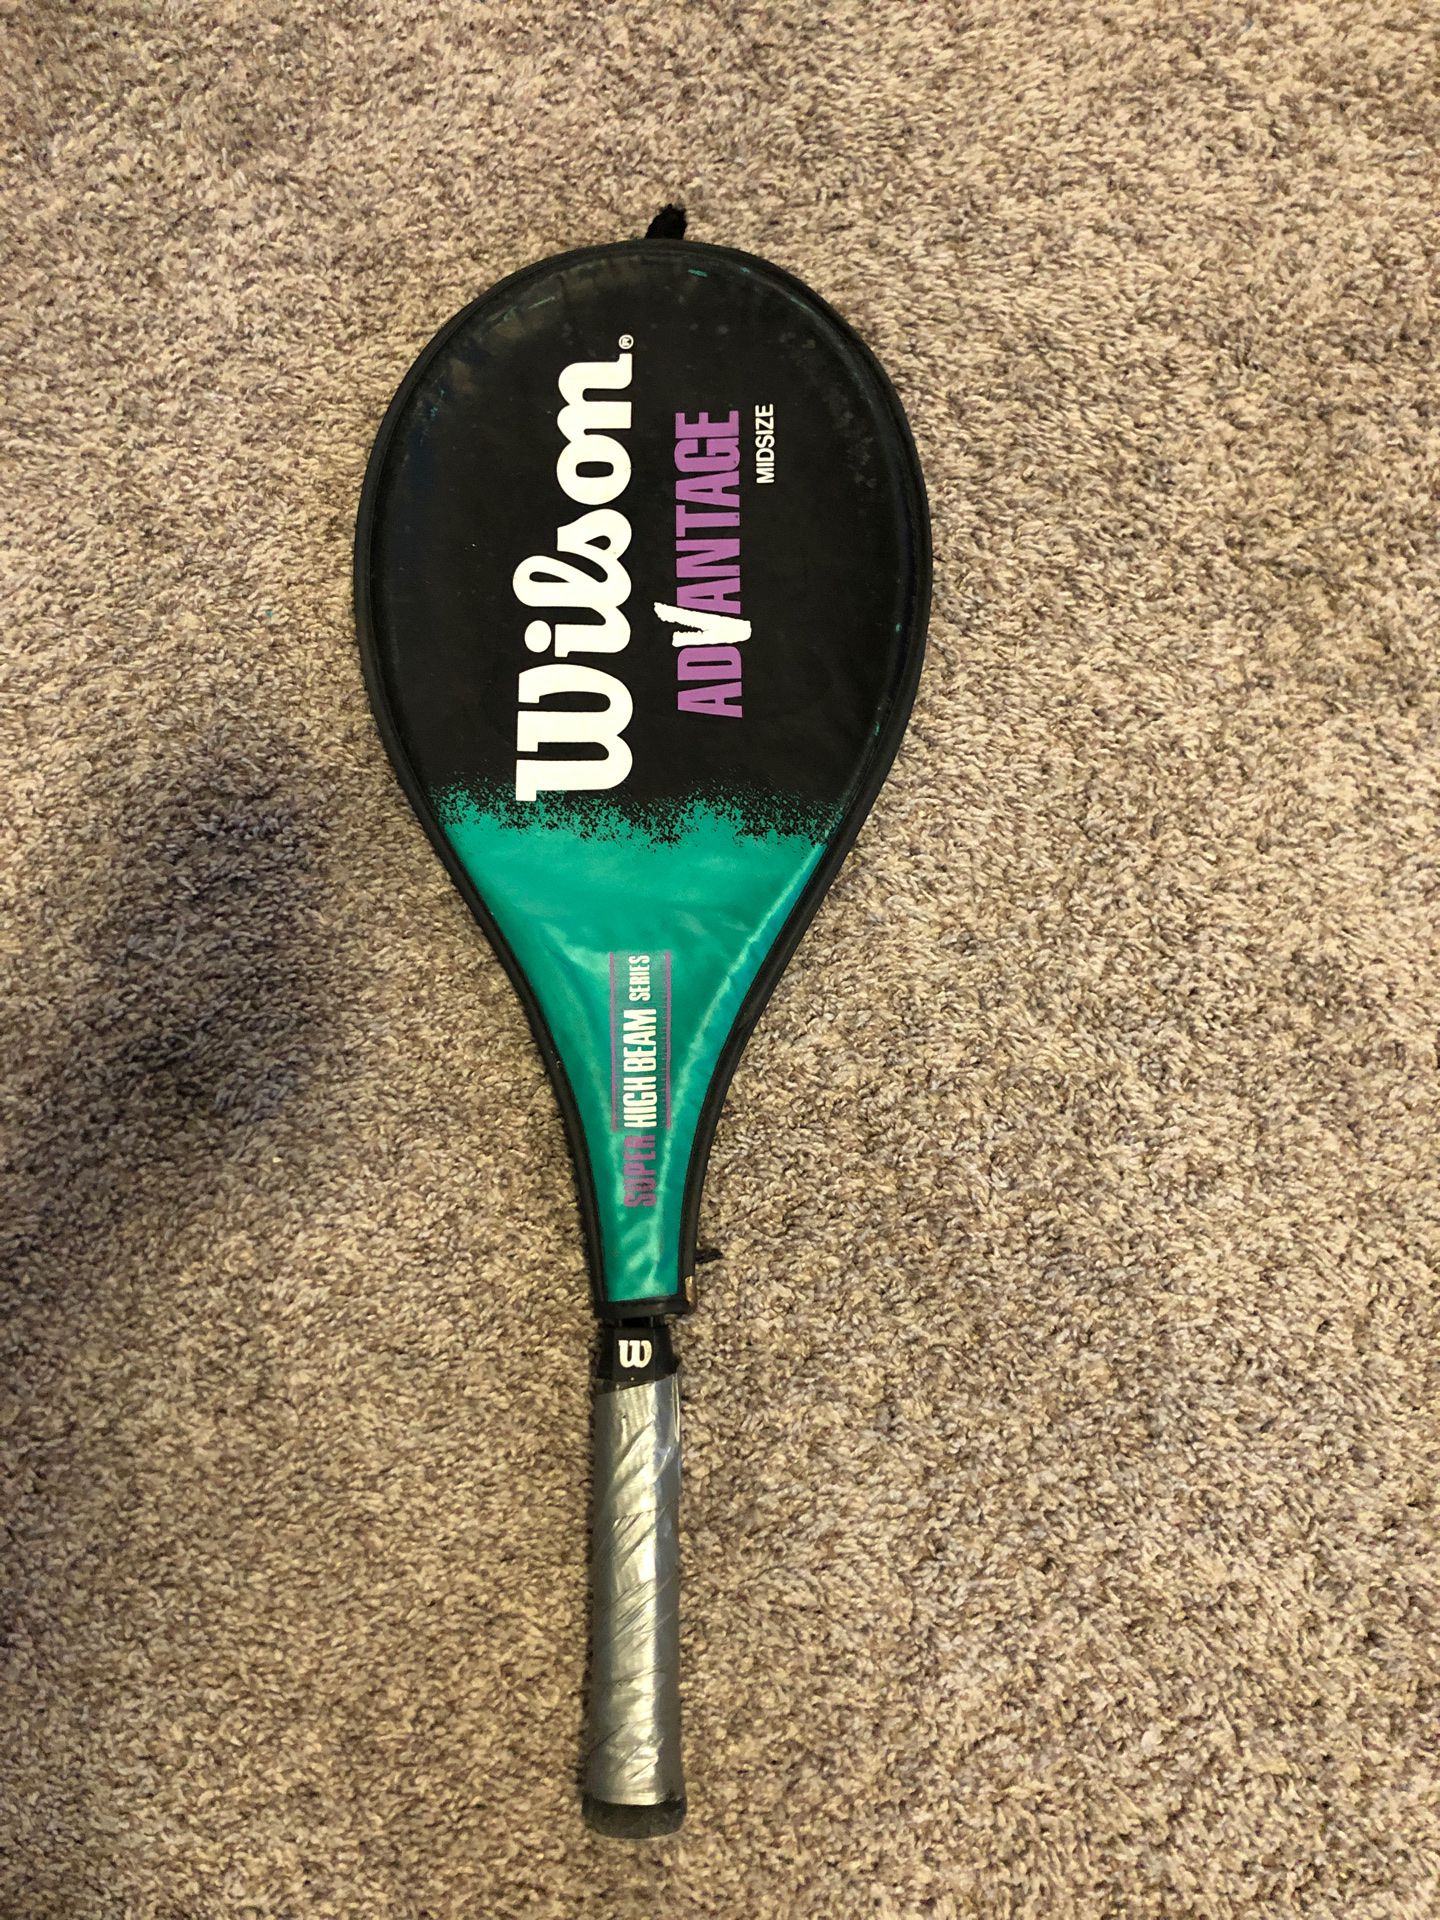 Wilson Tennis Racket with cover